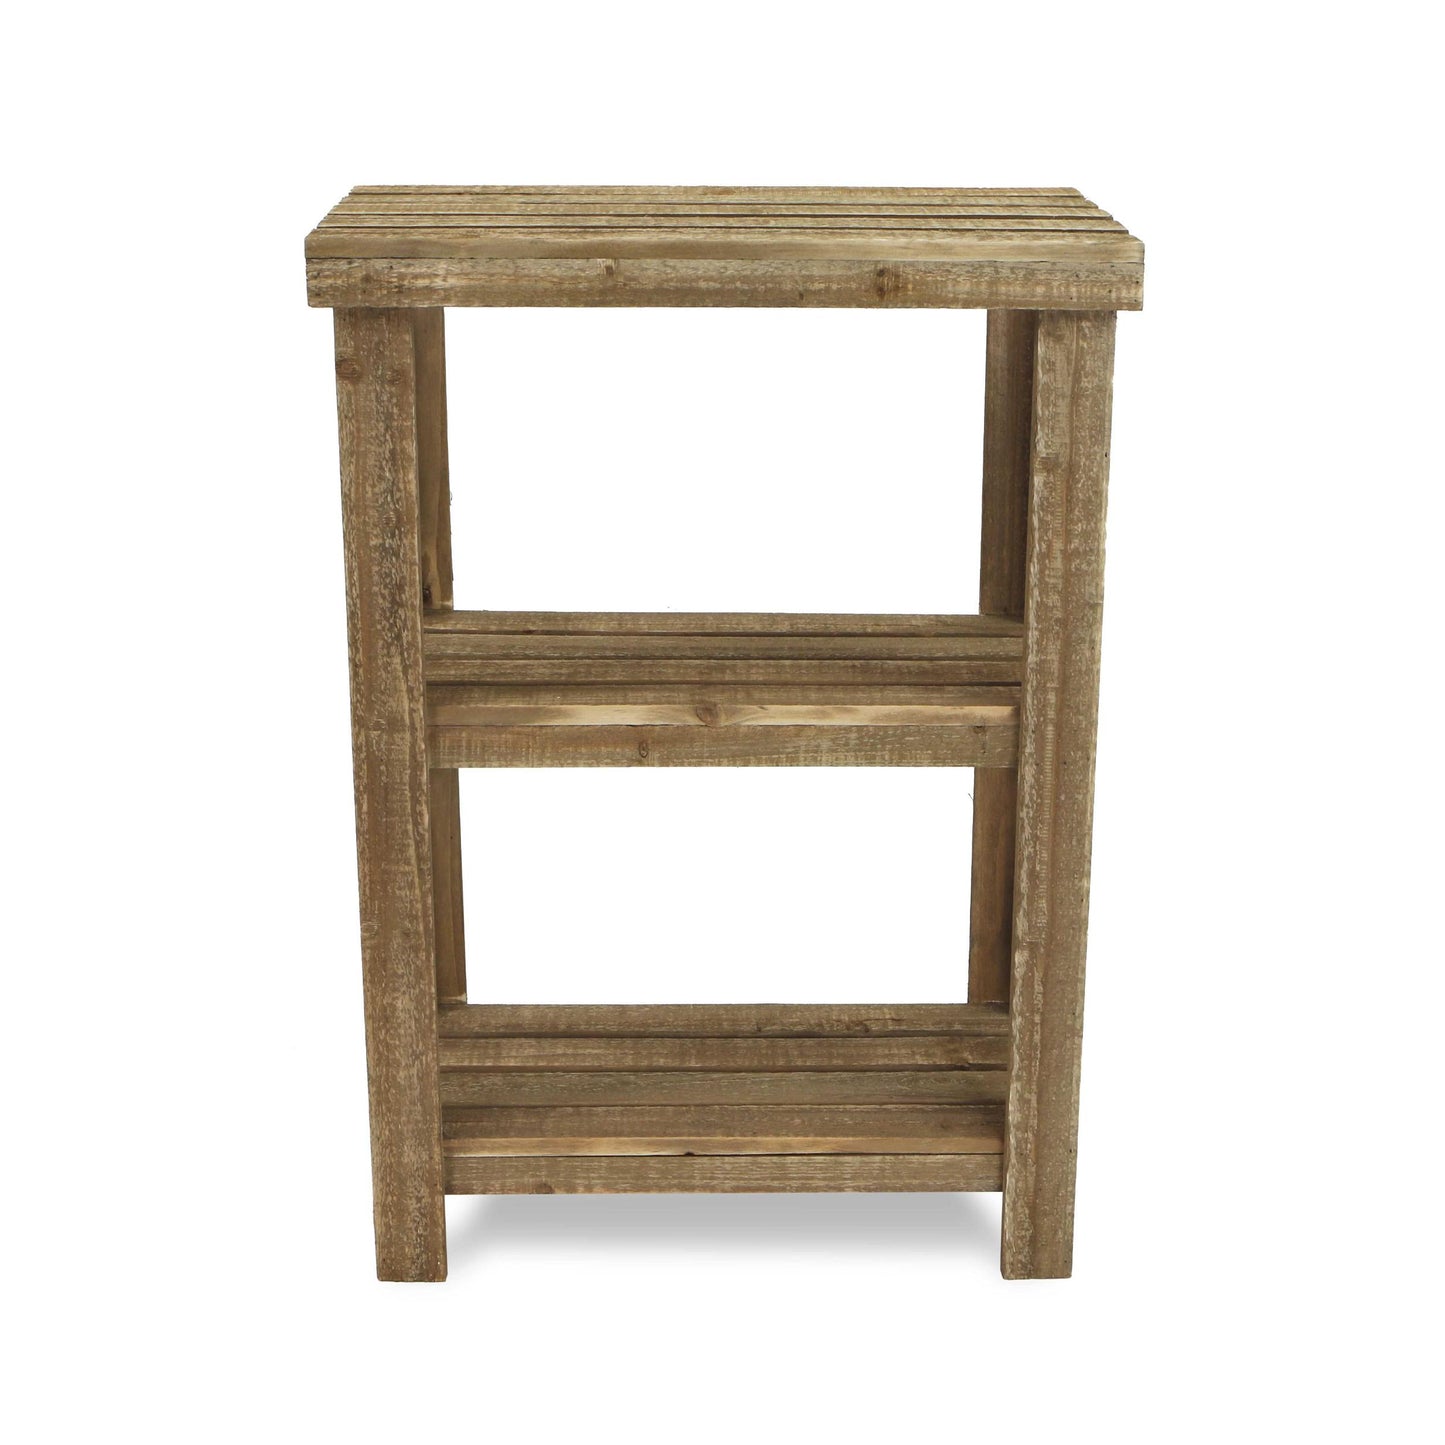 Rustic Natural Wood Finish 2 Shelf Side Table